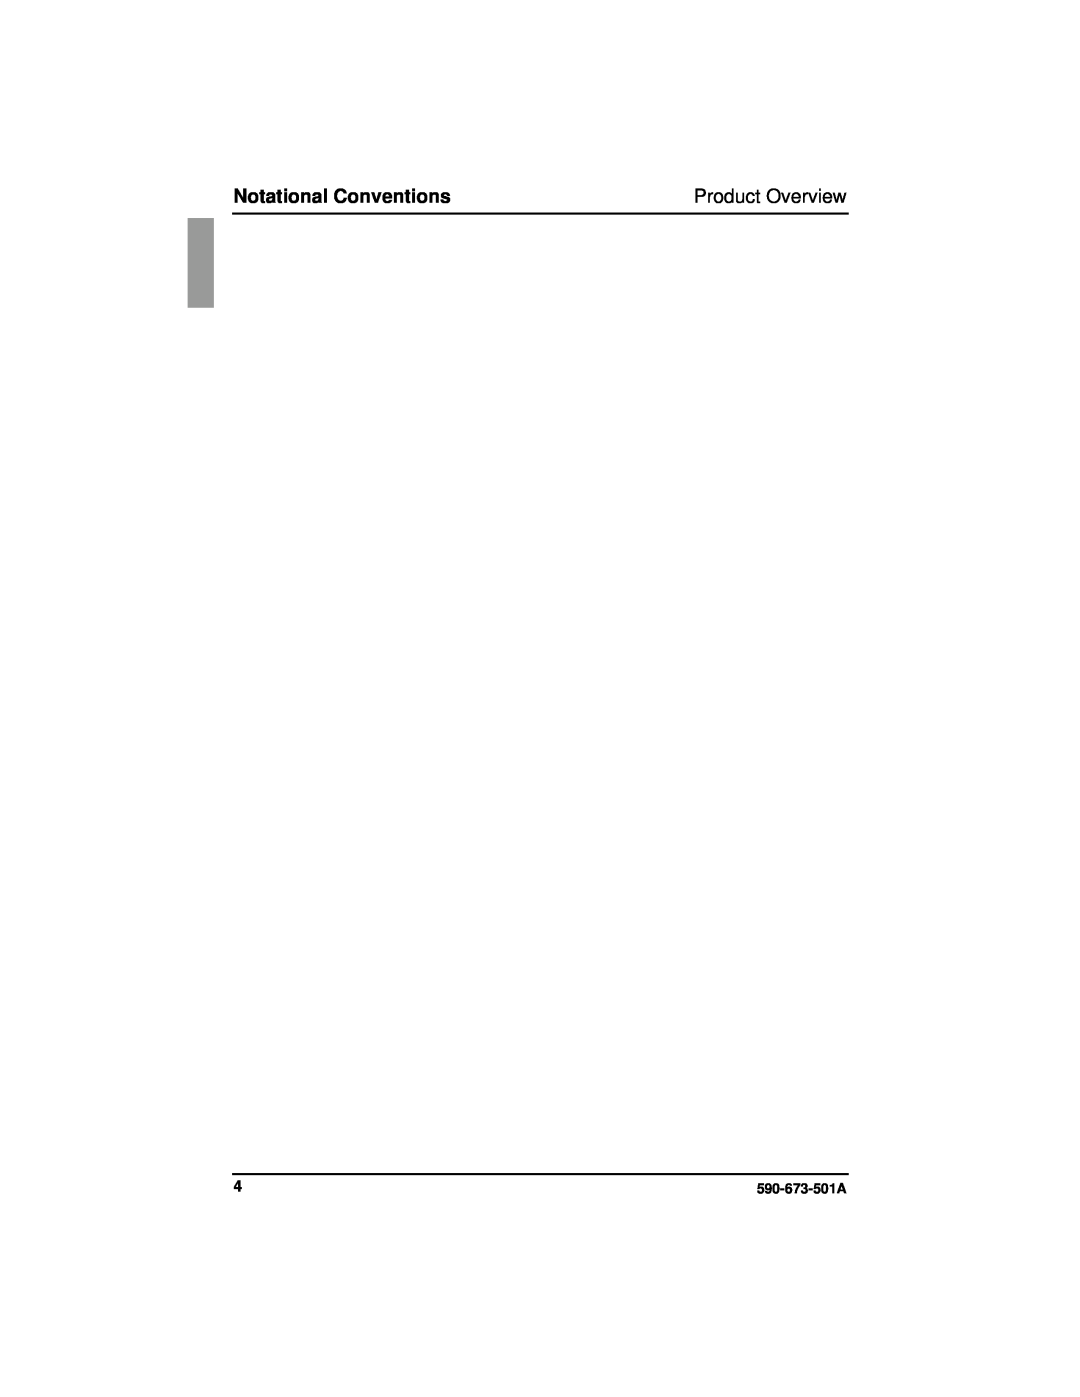 Fujitsu Siemens Computers BX600 manual Notational Conventions, Product Overview, 590-673-501A 